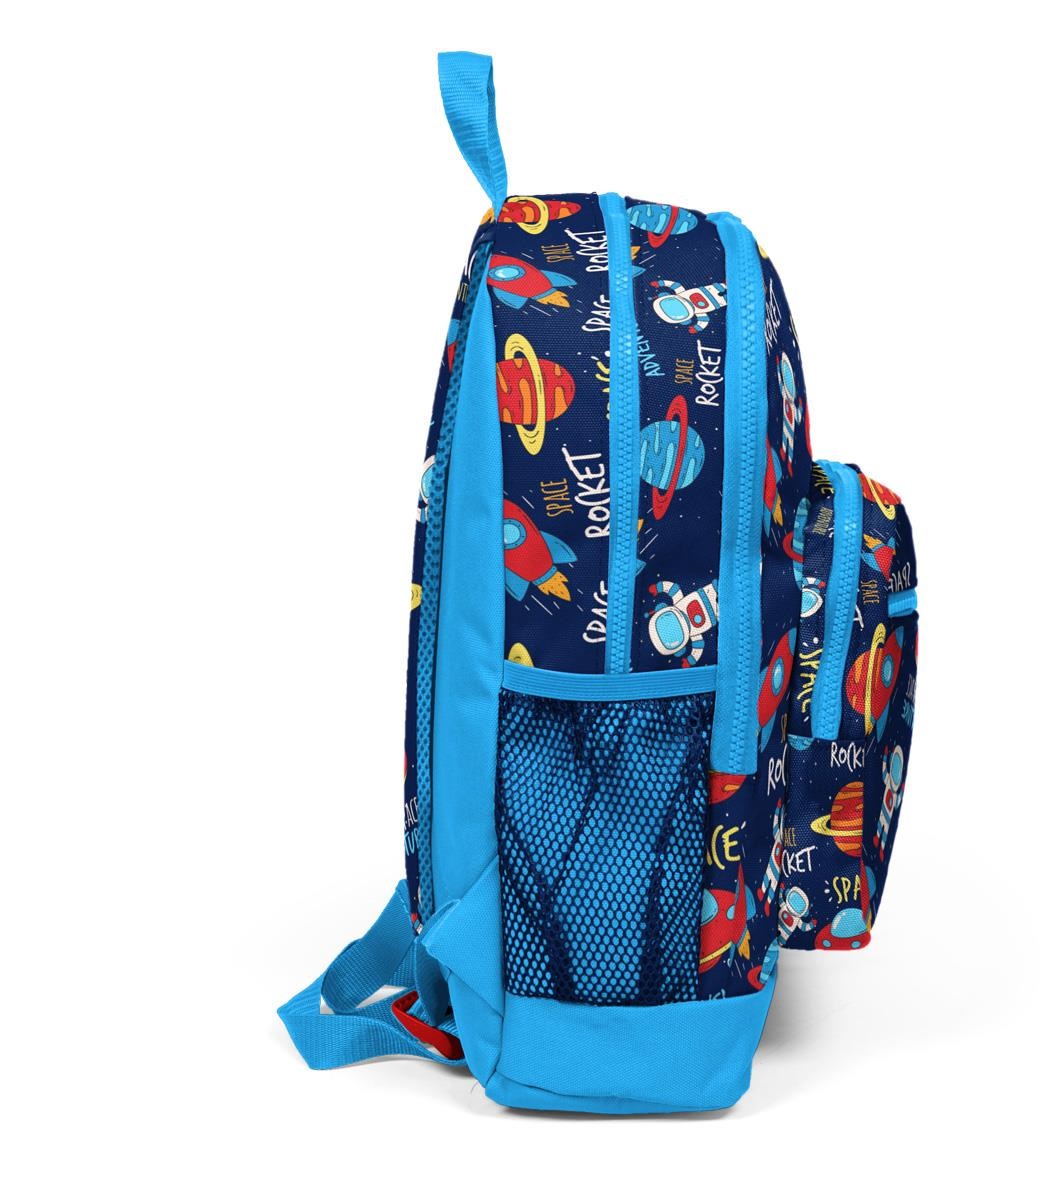 Coral High Kids Four Compartment School Backpack - Navy Blue Space Pattern